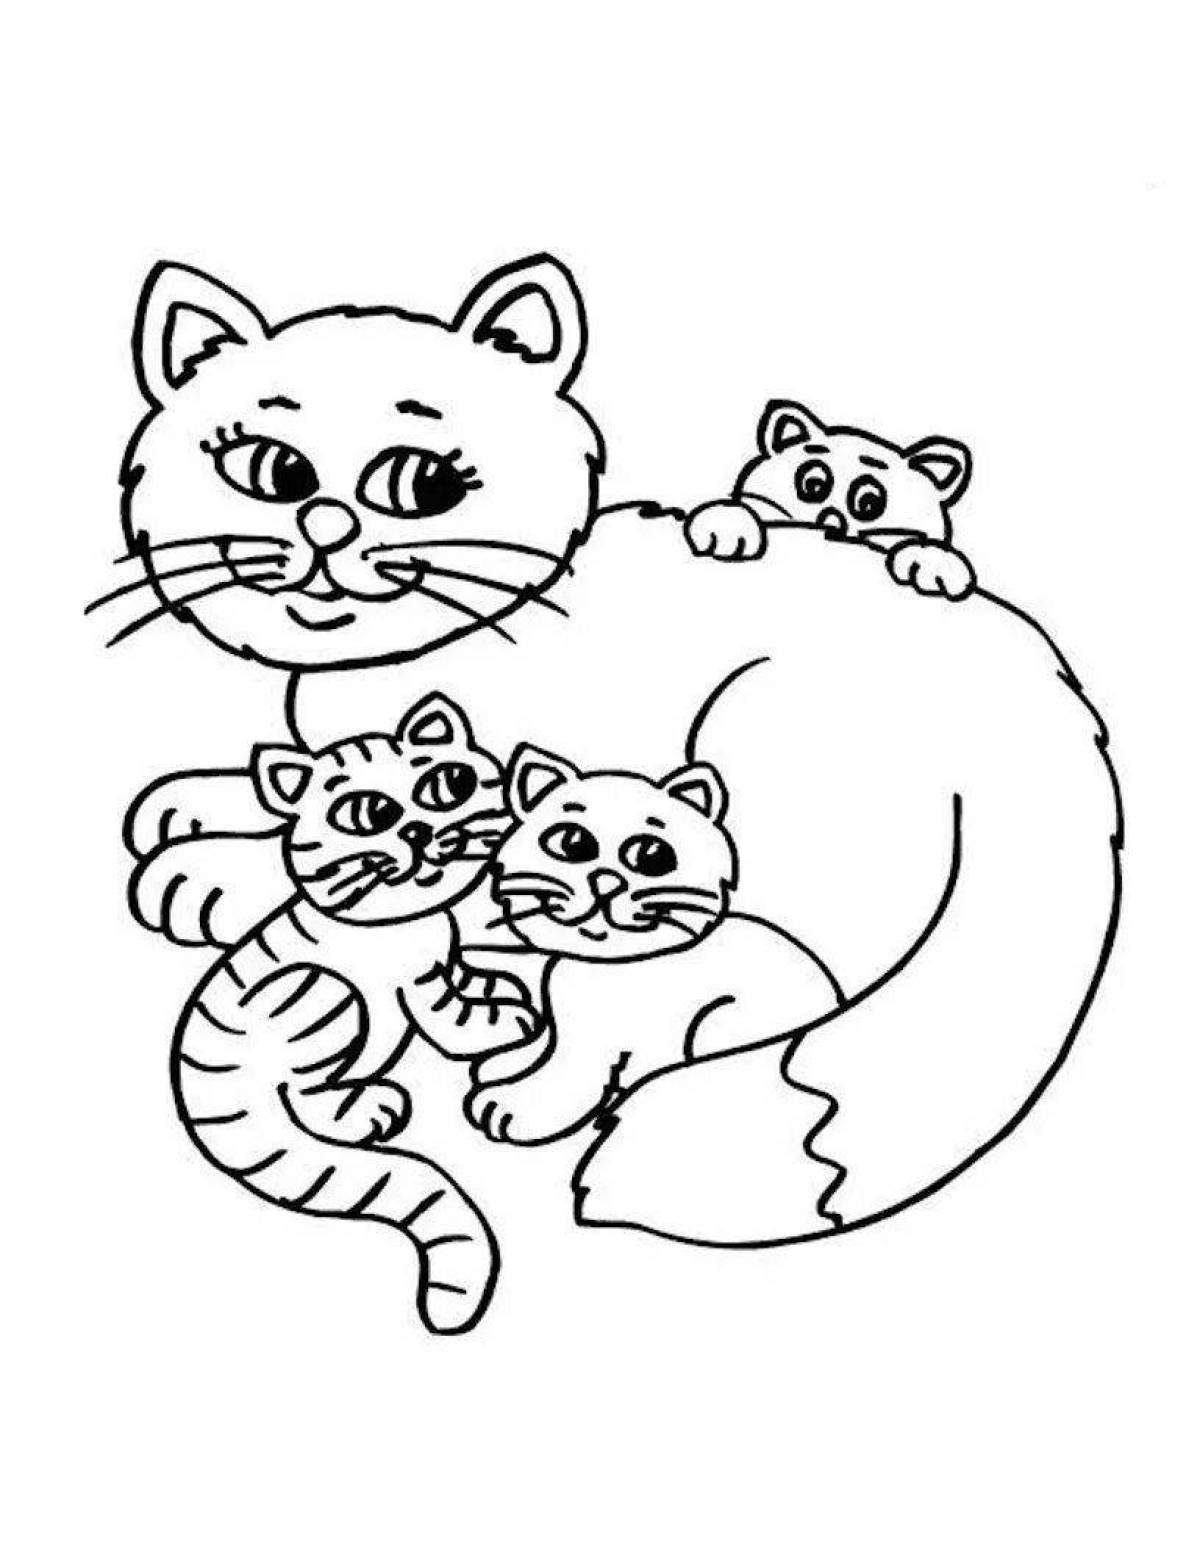 Coloring book dozing 3 kittens